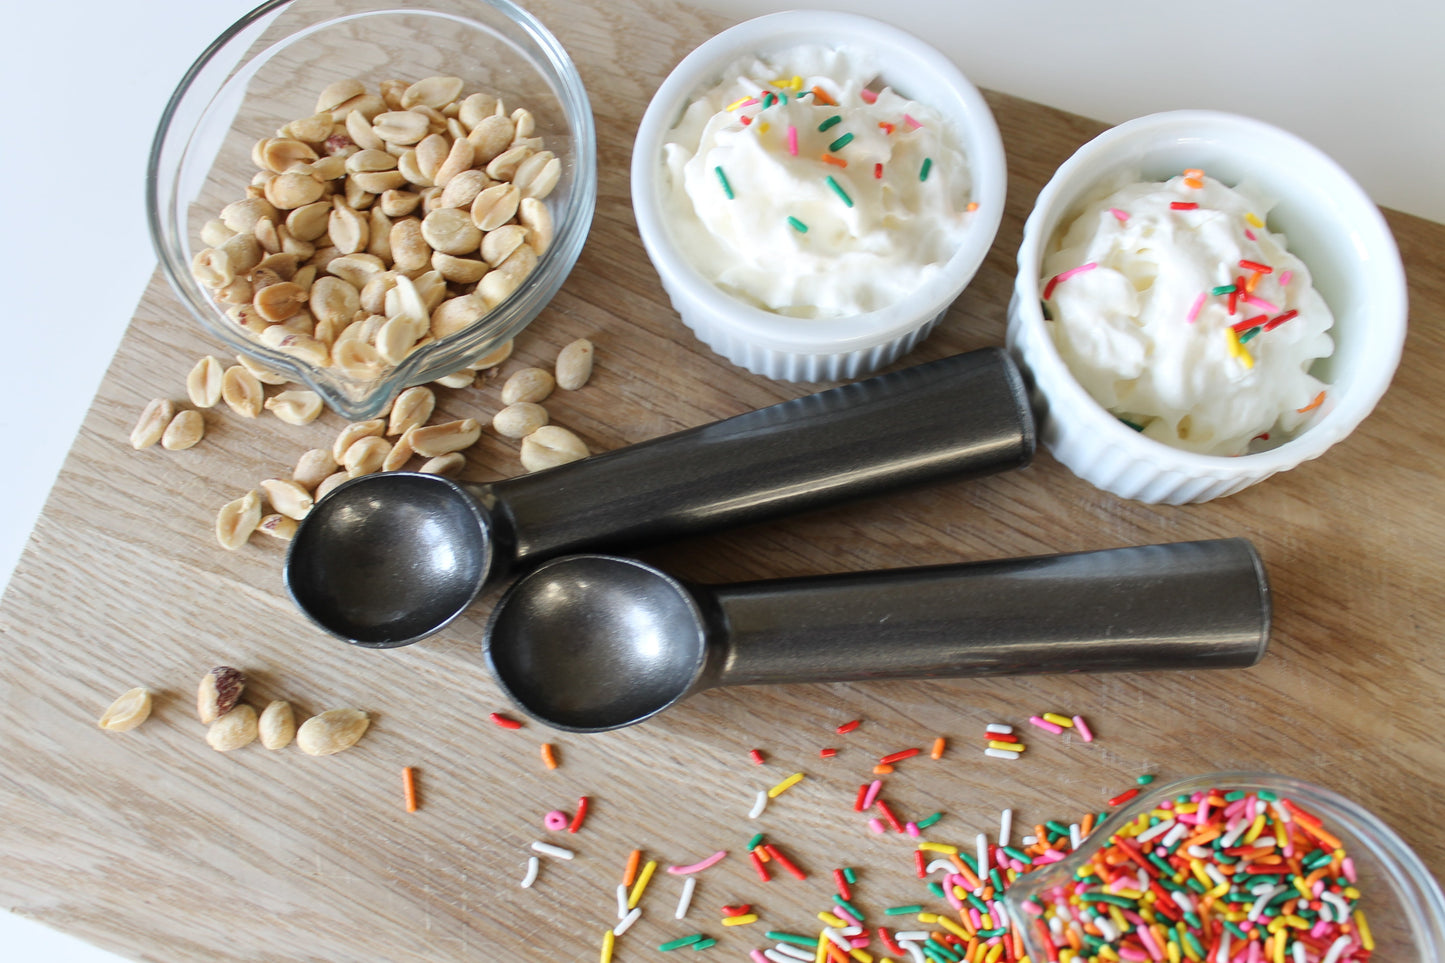 Personalized Ice Cream Scoops | Kevin Is Cool